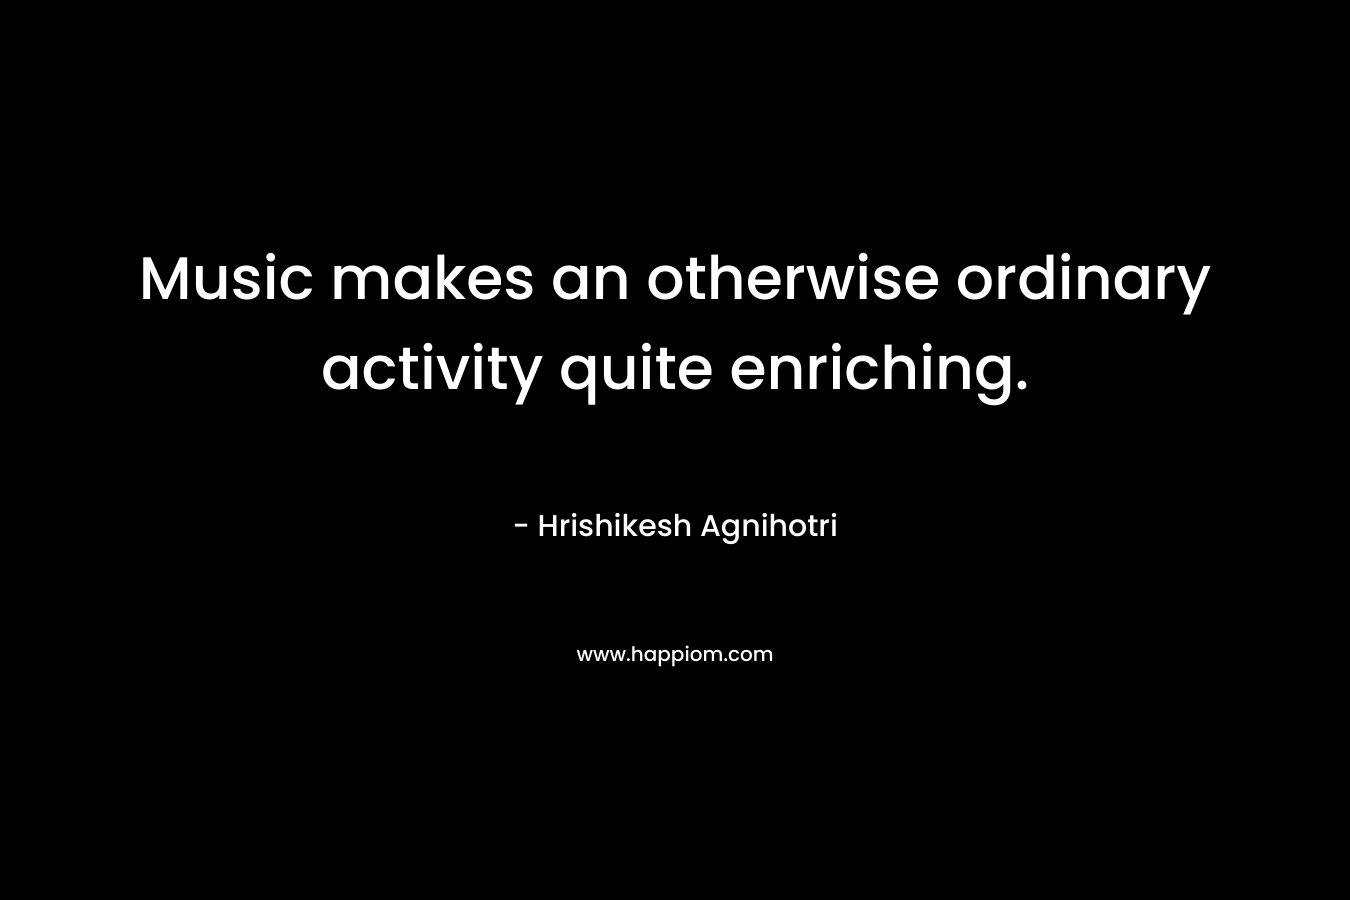 Music makes an otherwise ordinary activity quite enriching.